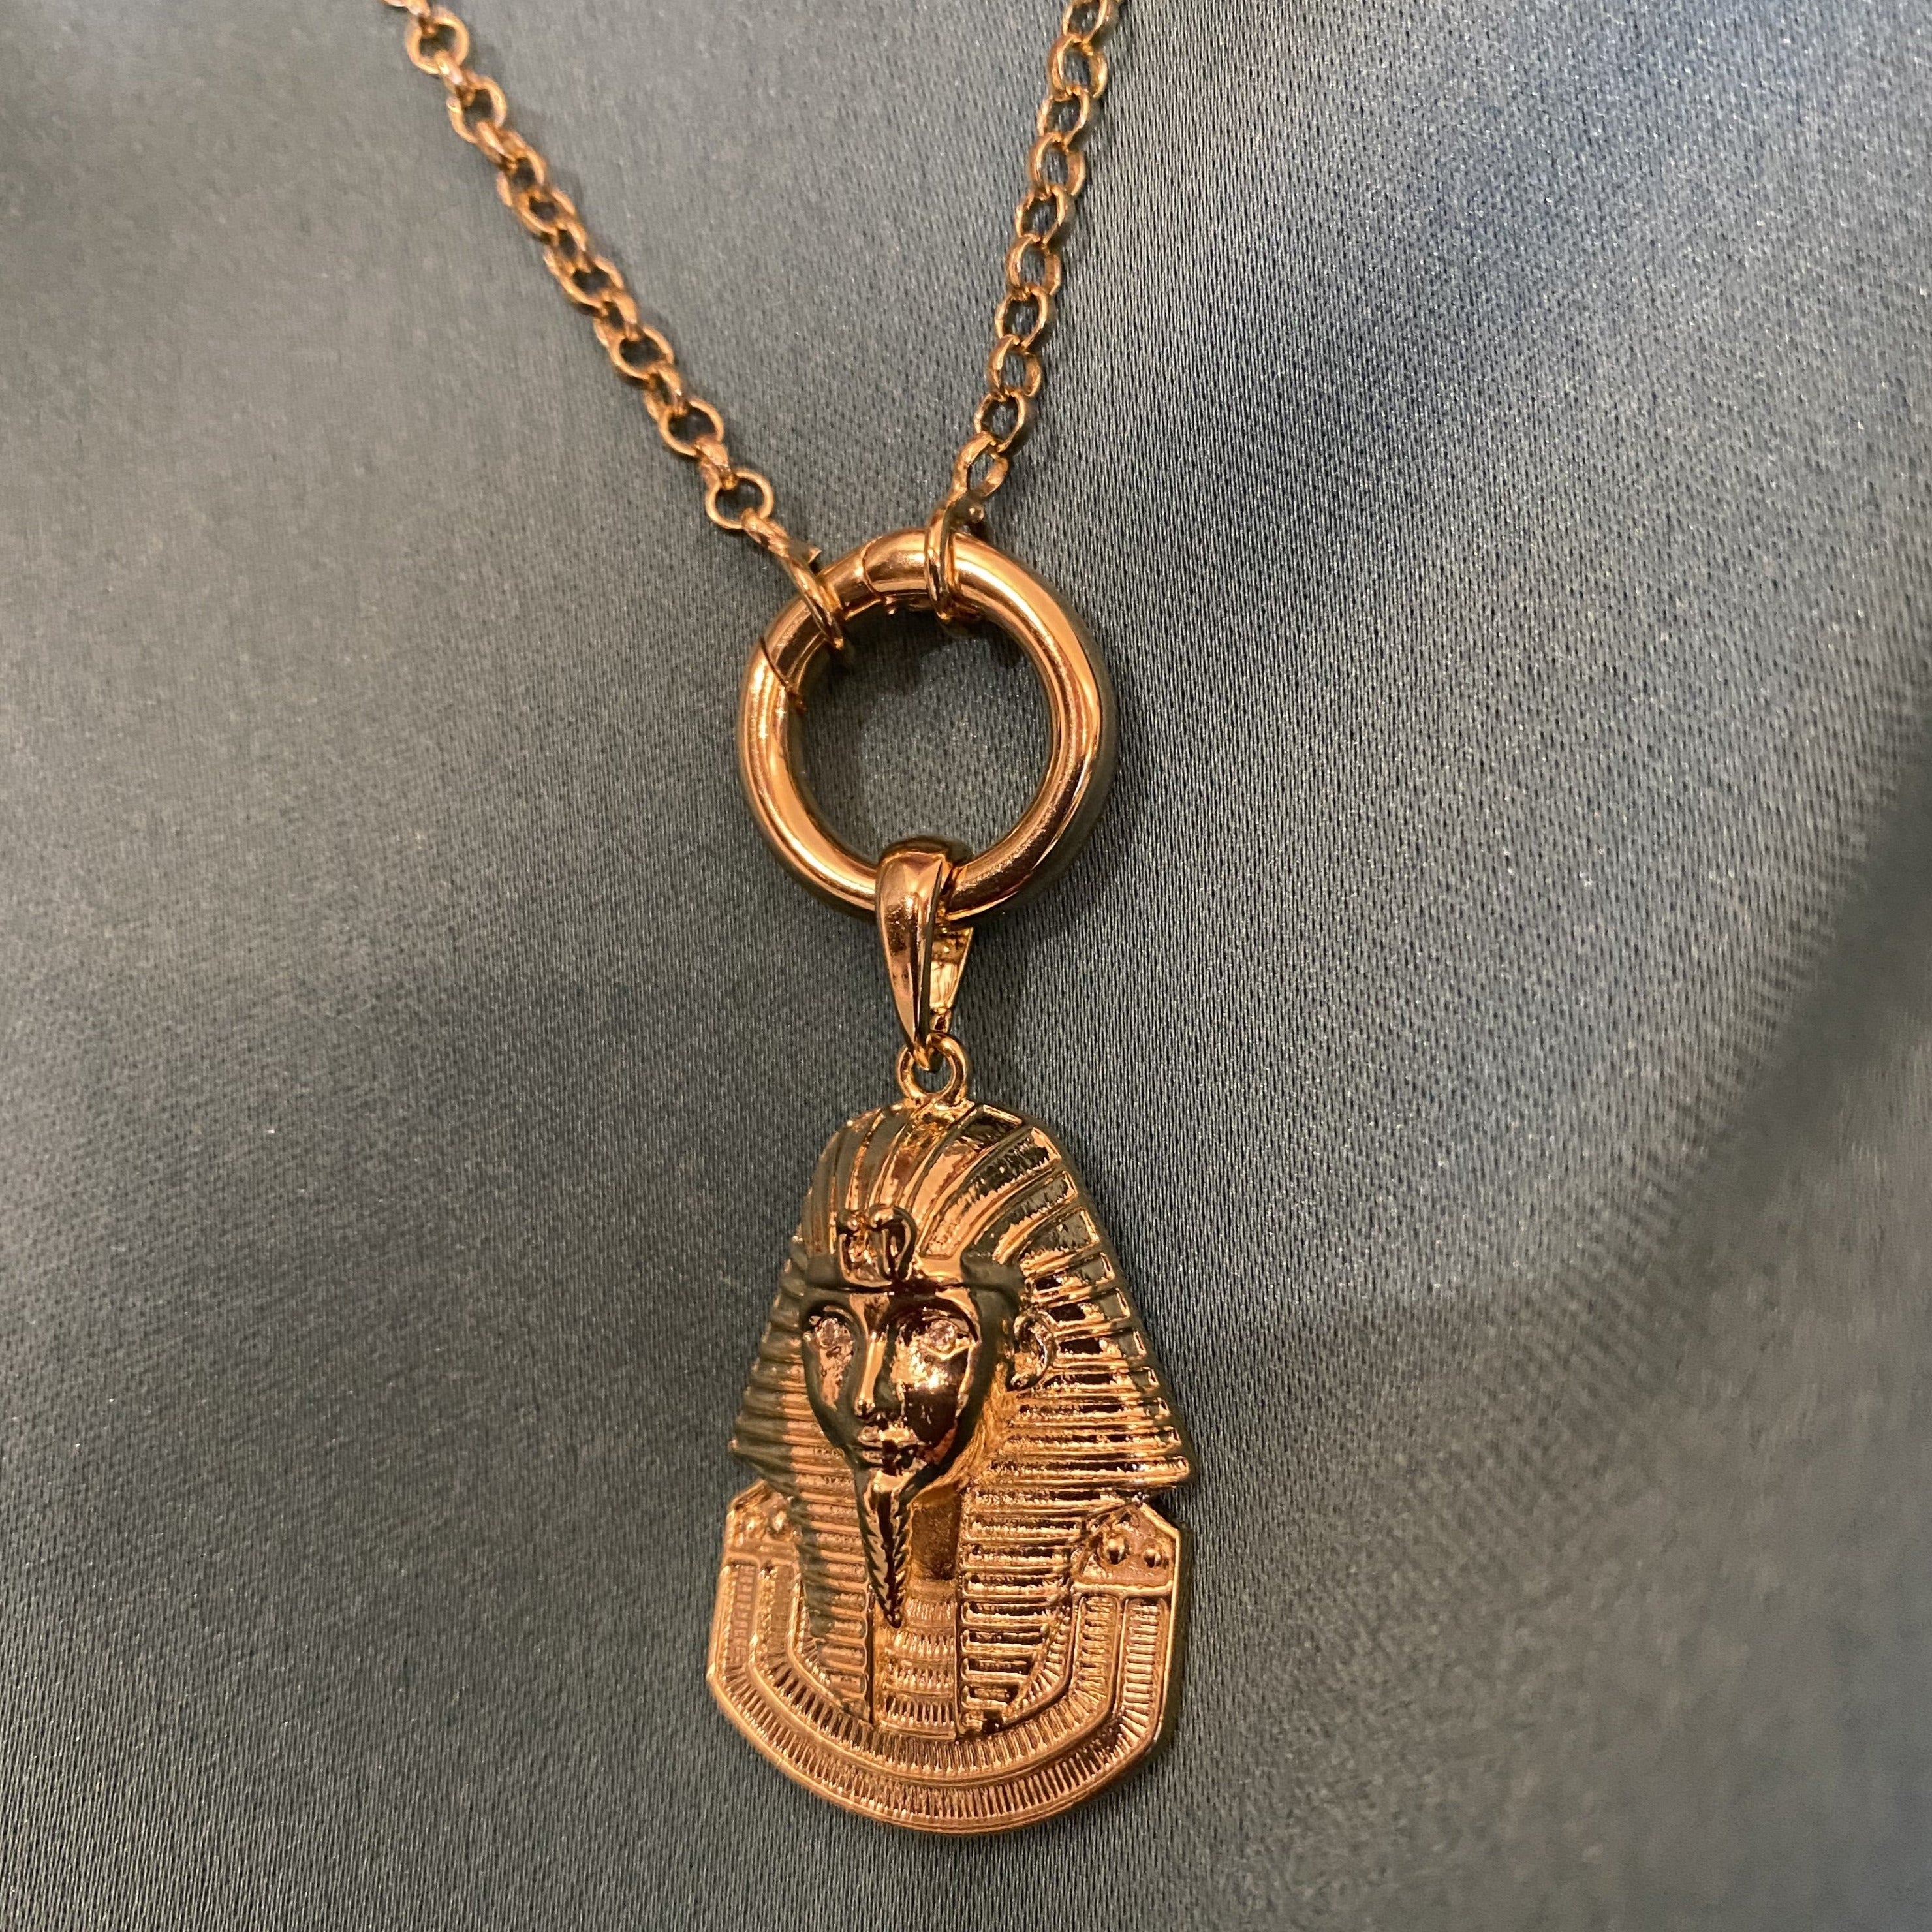 Buy Egyptian Necklace, Cleopatra Necklace, Ancient Egypt Necklace, Gold Bib  Necklace, Gold Gypsy Necklace, Ethnic Gold Necklace, Unique Necklace Online  in India - Etsy